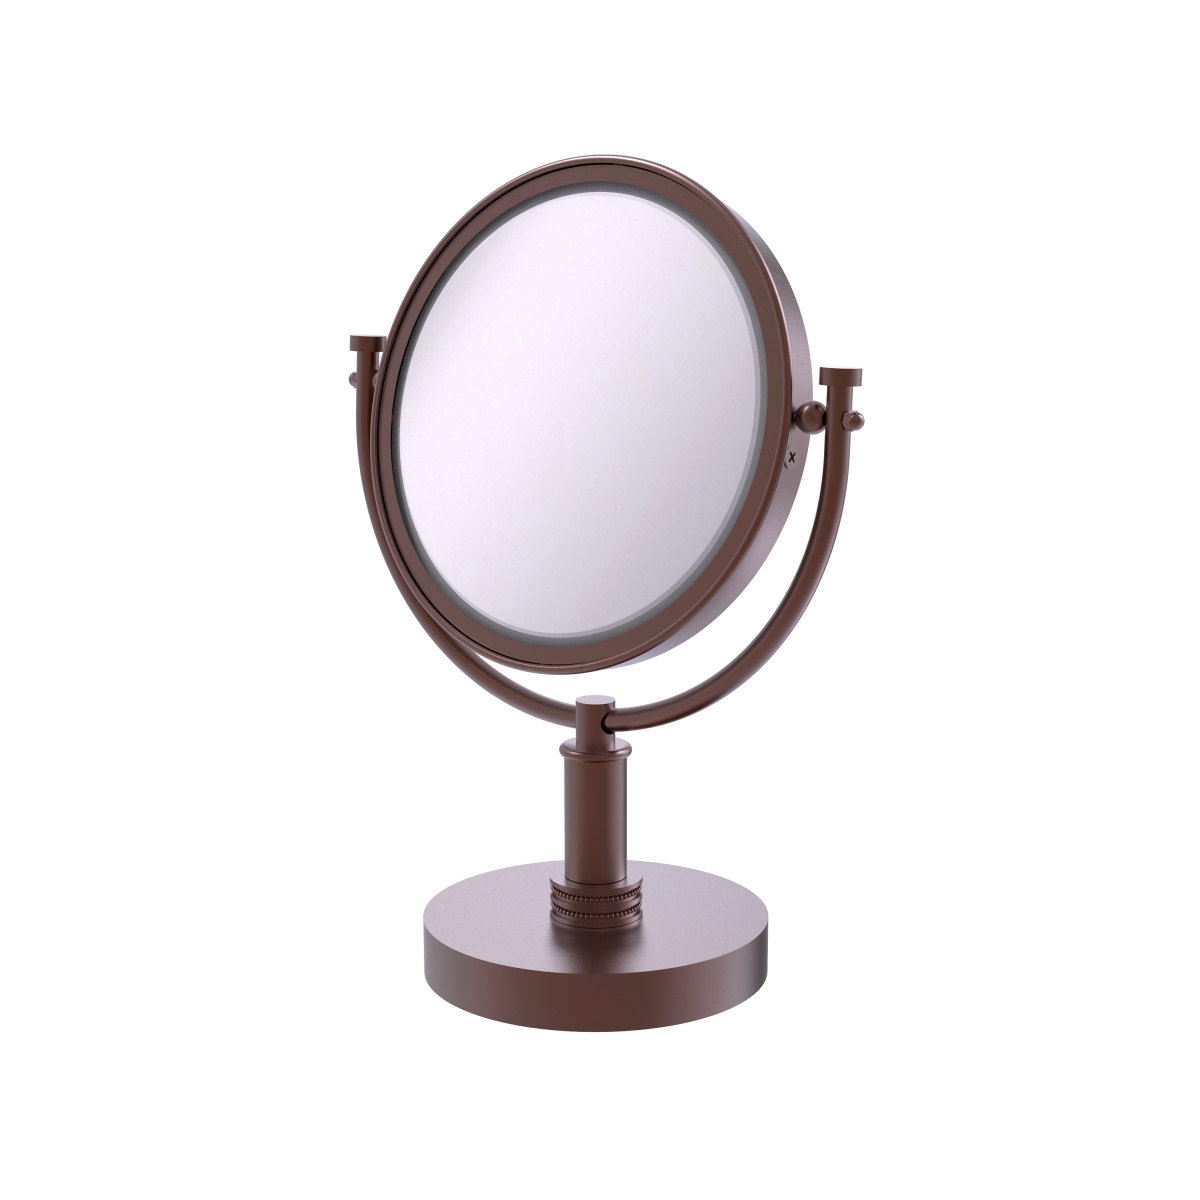 Picture of Allied Brass DM-4D-2X-CA 8 in. Vanity Top Make-Up Mirror 2X Magnification, Antique Copper - 15 x 8 x 8 in.